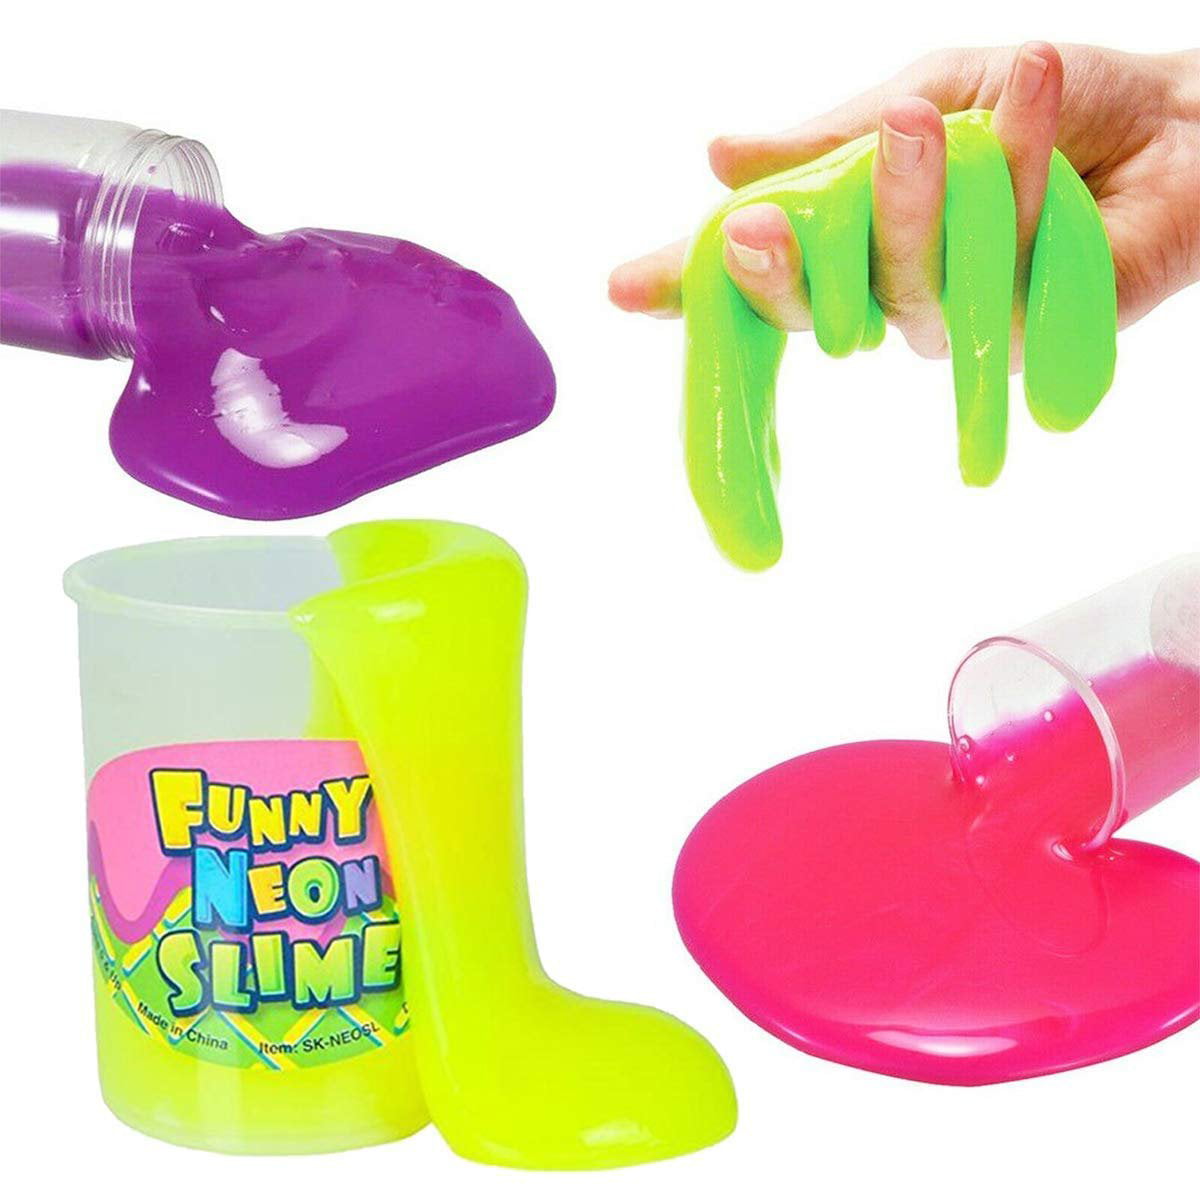 Great for Any... Pack of 6 Kicko Neon Slime Putty Sludgy Gooey Feeling 